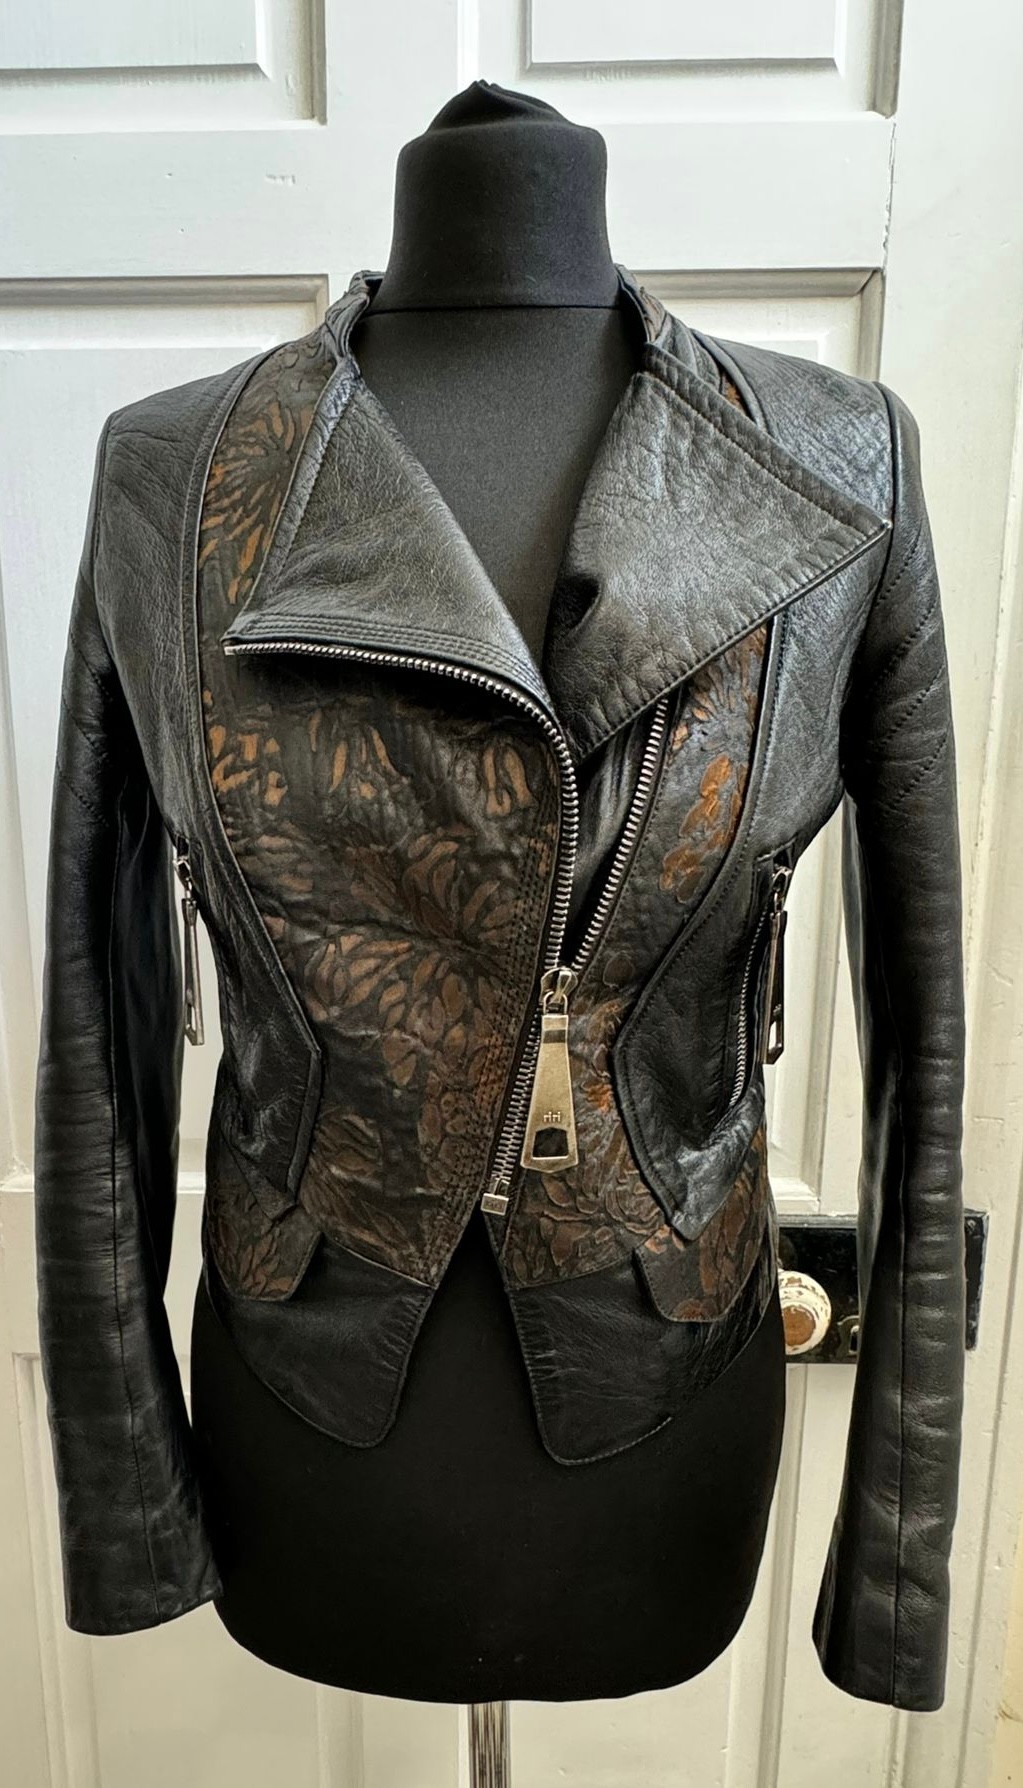 A real black leather jacket by Deja - Vu along with a genuine black leather Gucci Marmont bag. - Image 8 of 11